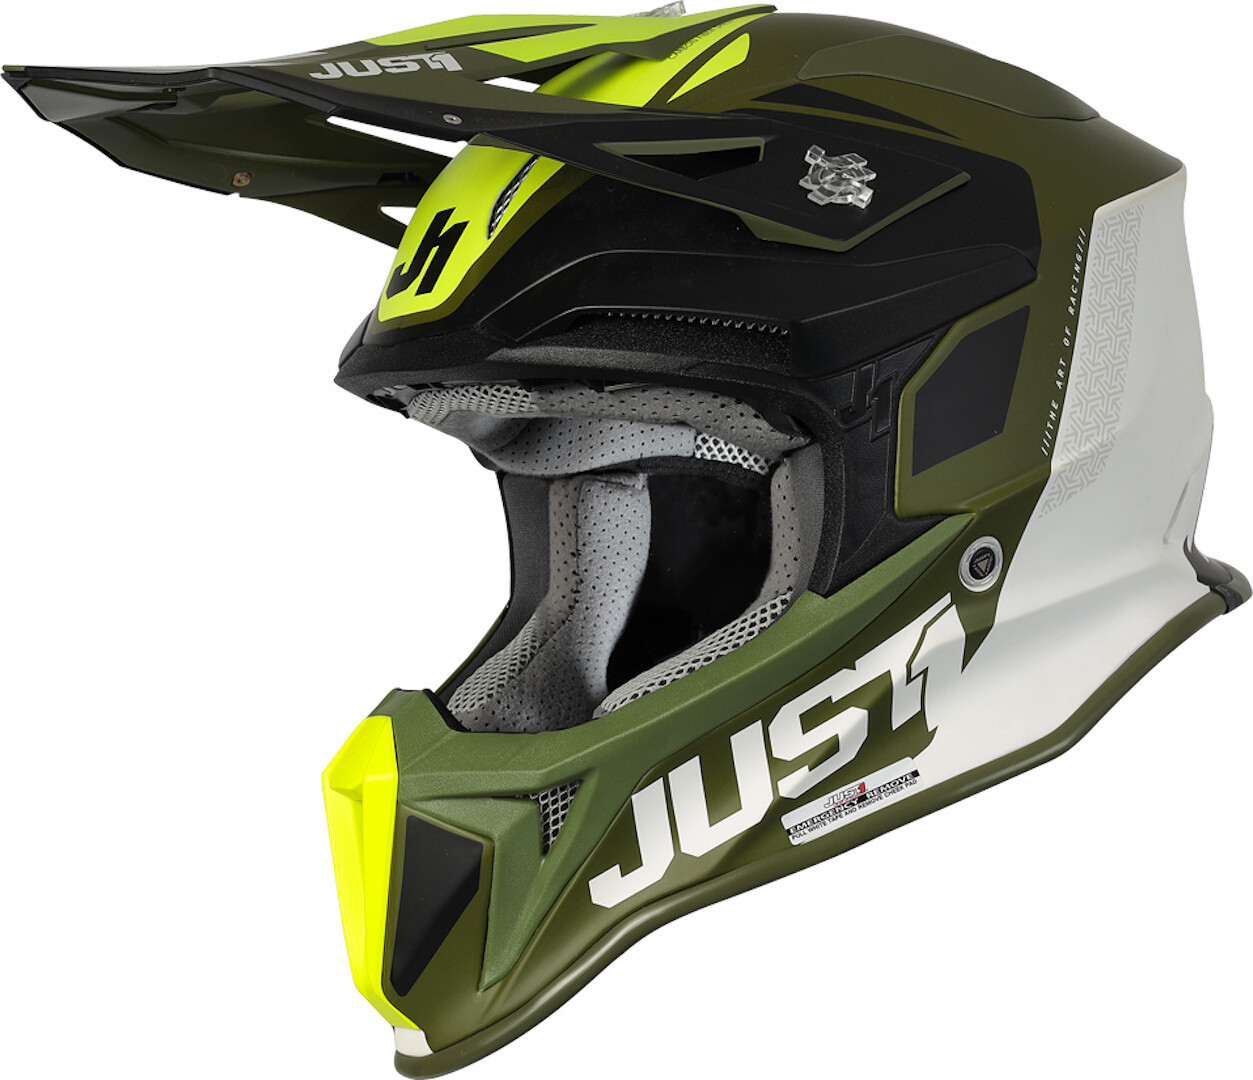 Image of Just1 J18 Pulsar Army Limited Edition MIPS Casco motocross, verde, dimensione L